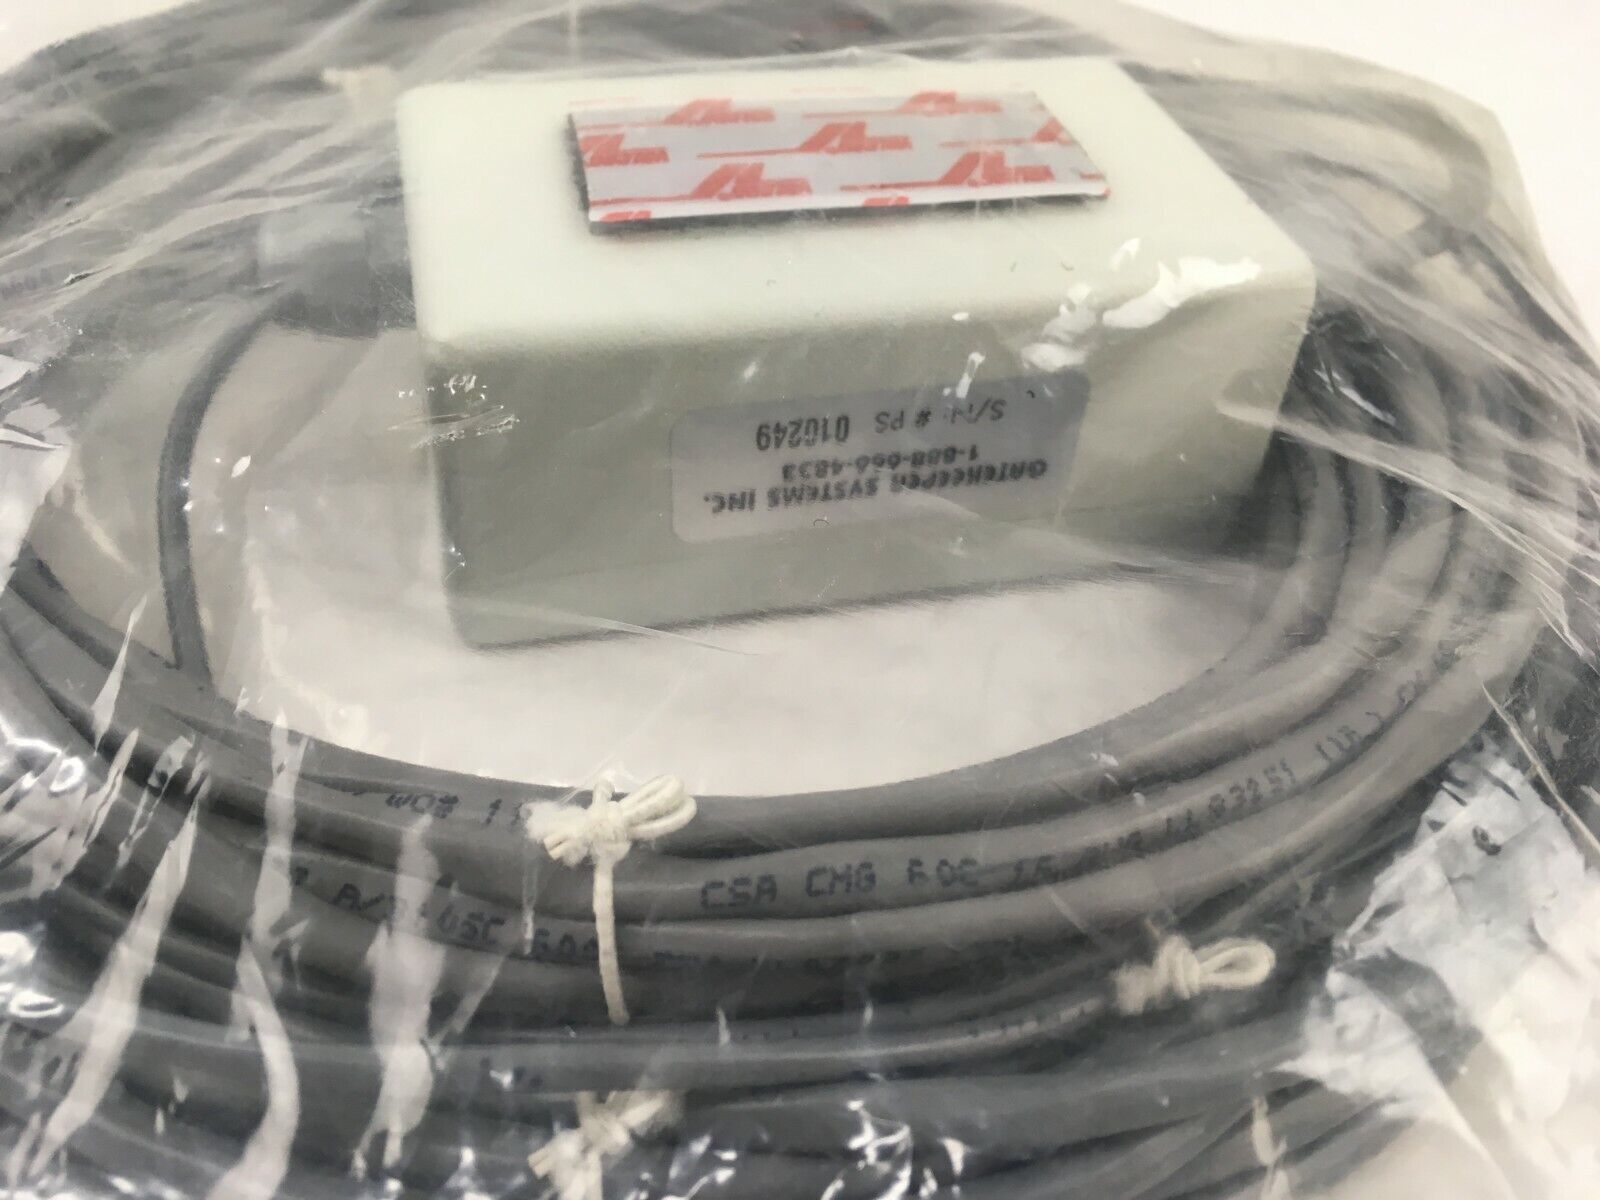 Gatekeeper Systems Controller Module Cable 010249